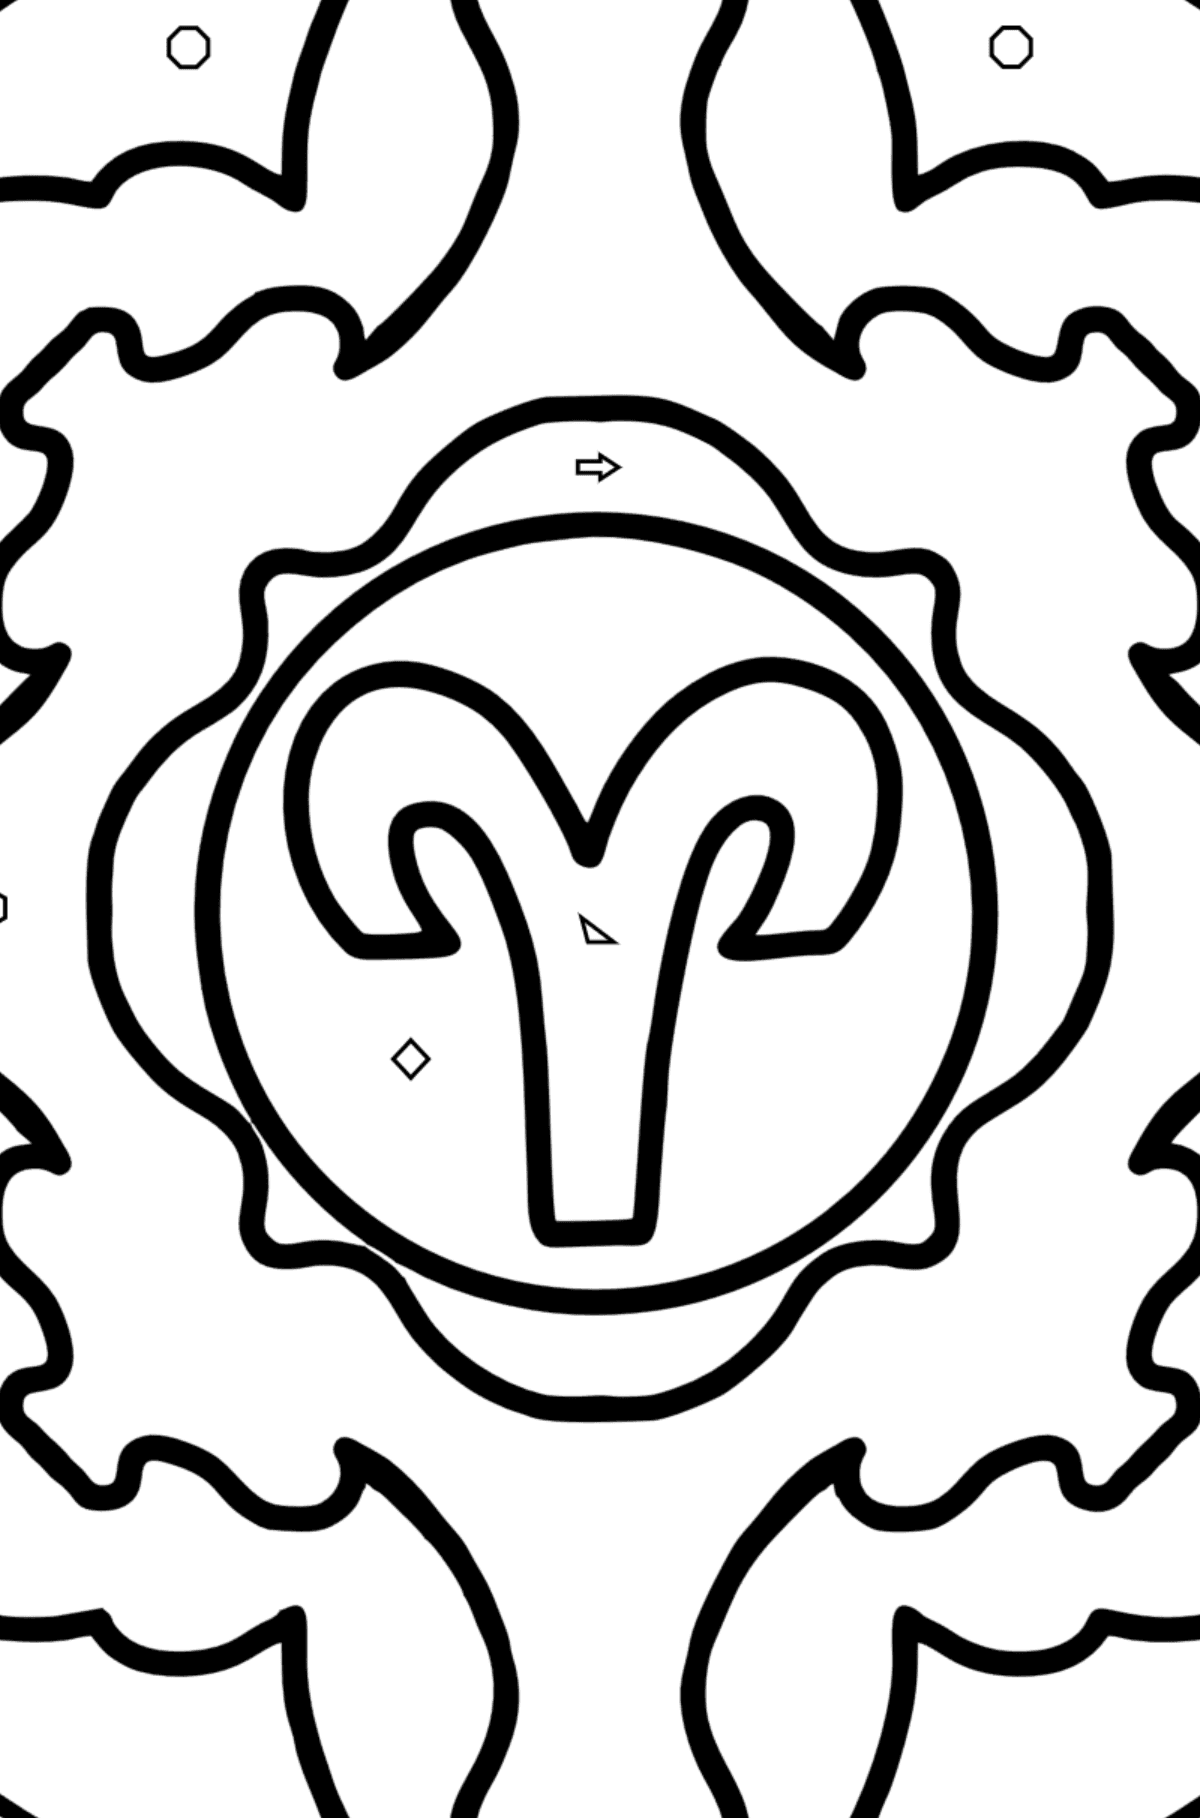 Coloring page - zodiac sign Aries - Coloring by Geometric Shapes for Kids